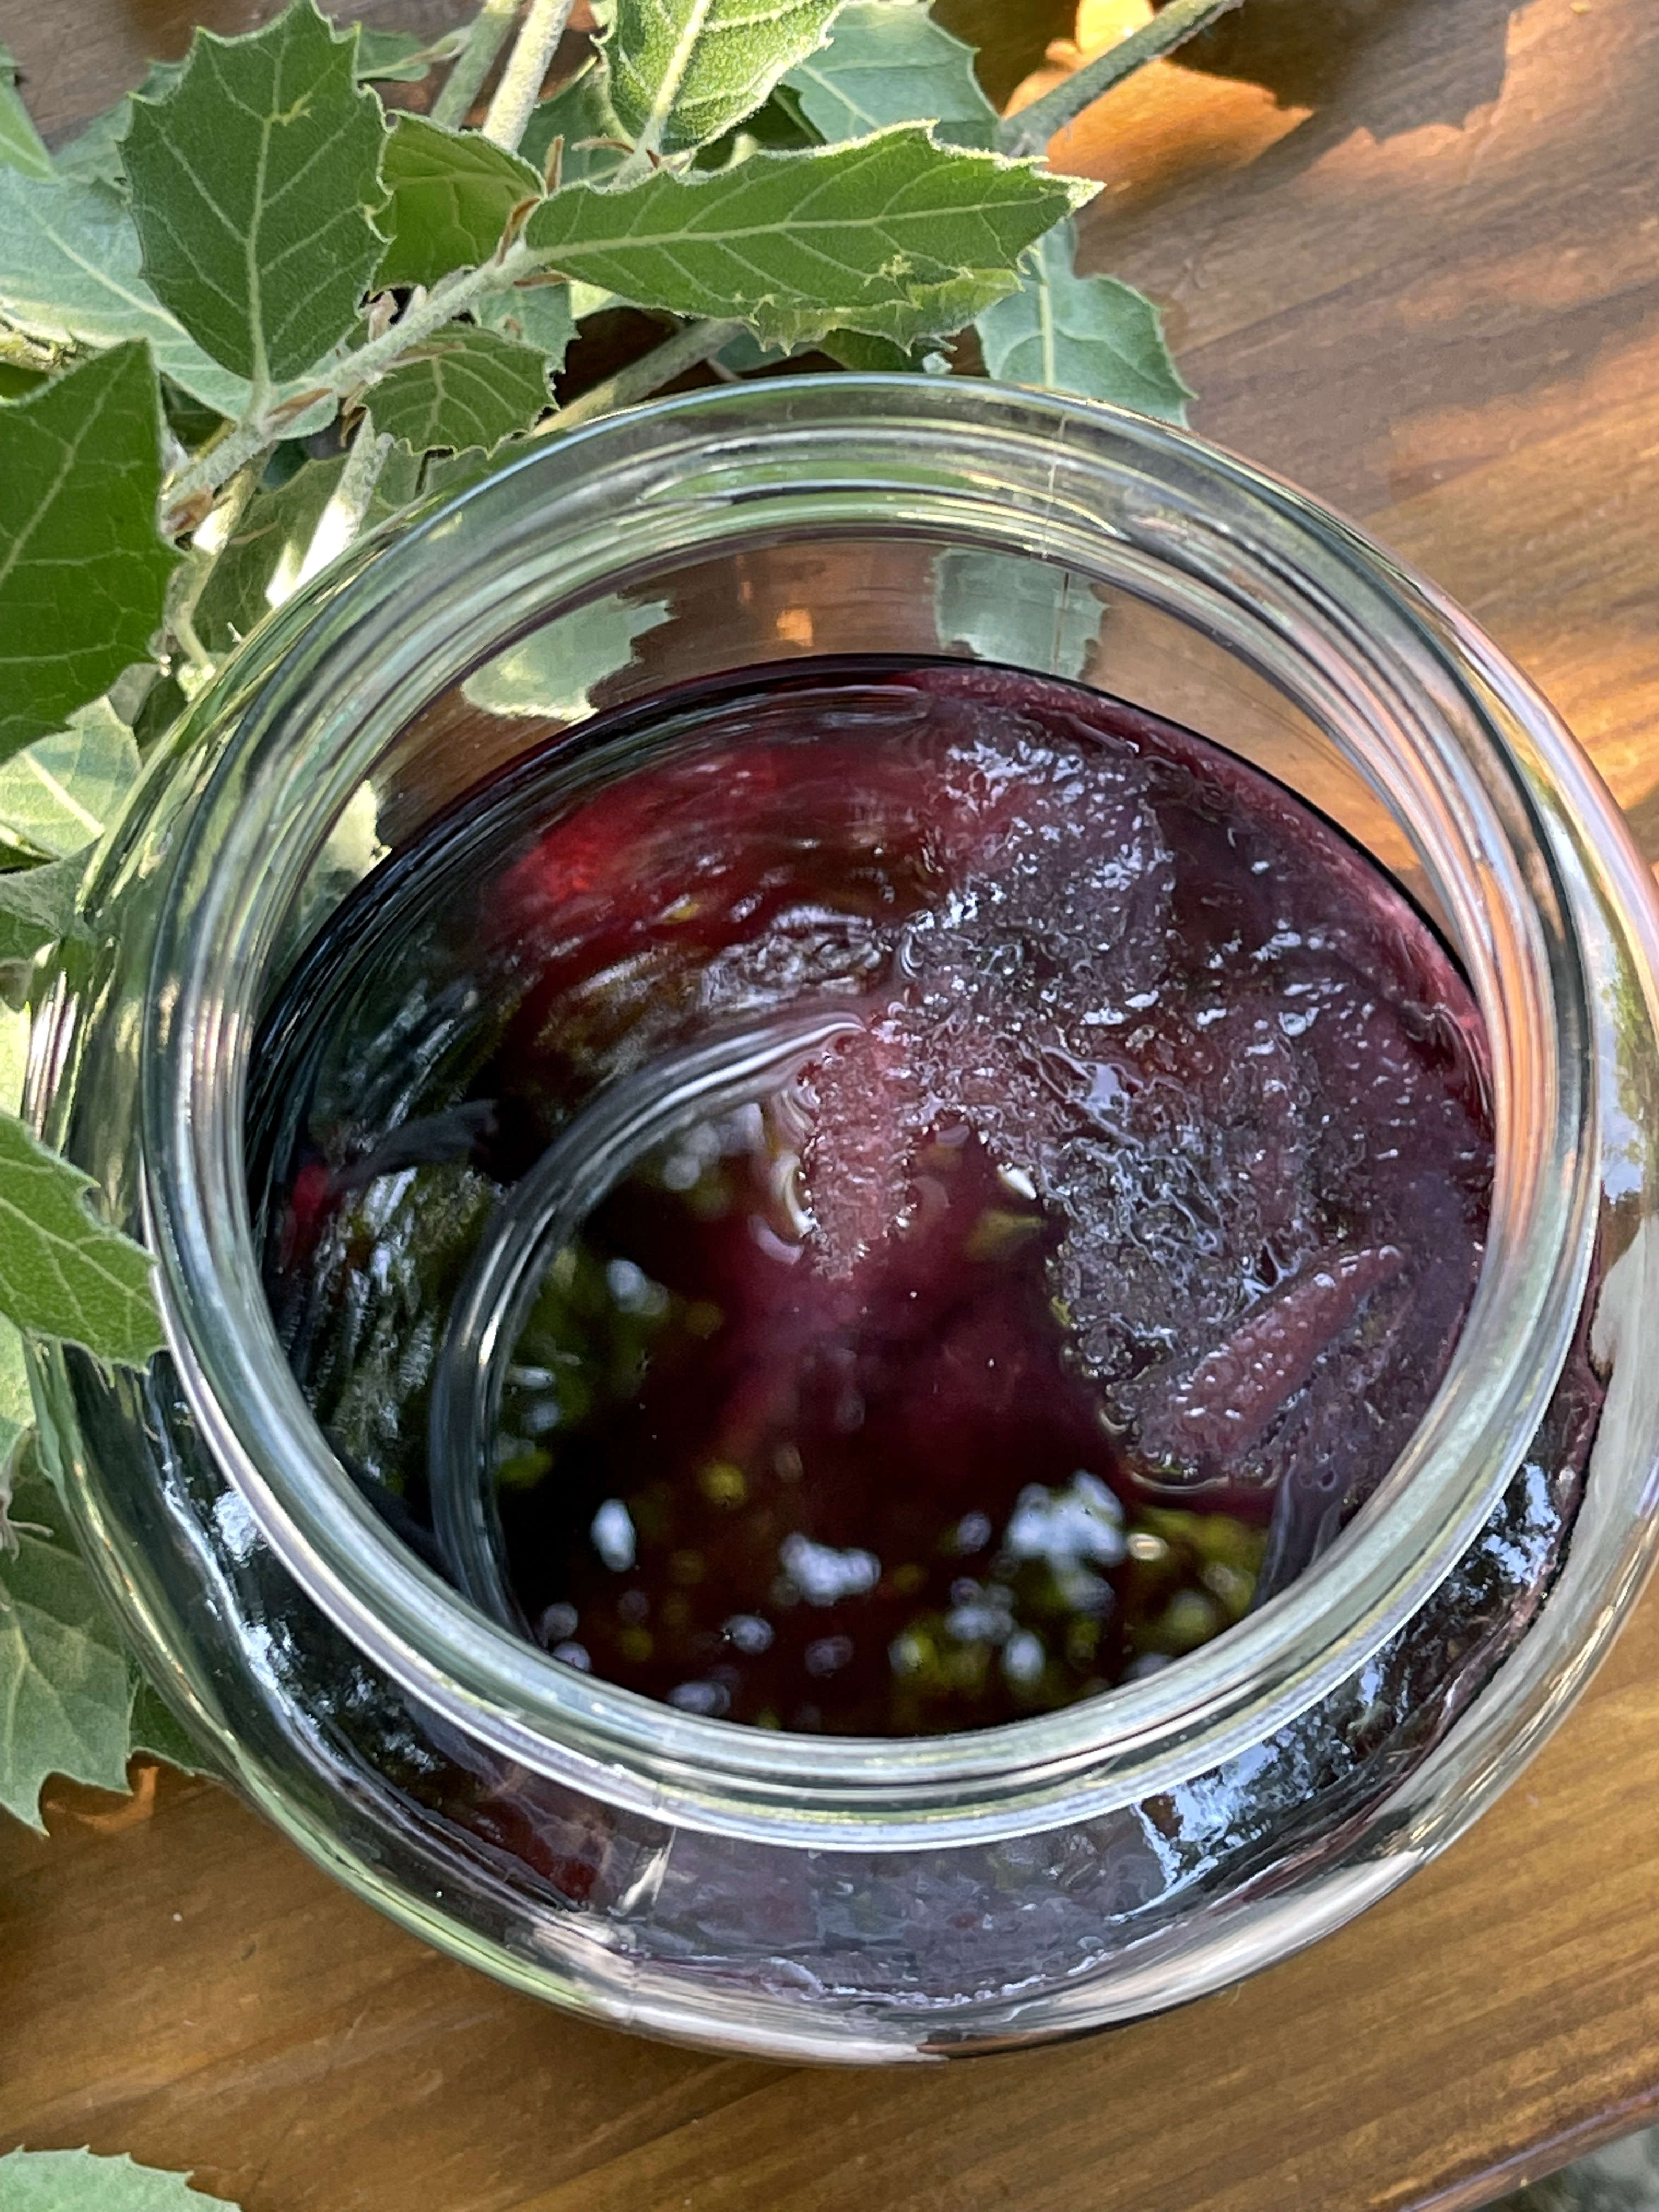 red wine vinegar brewing in a large glass jar